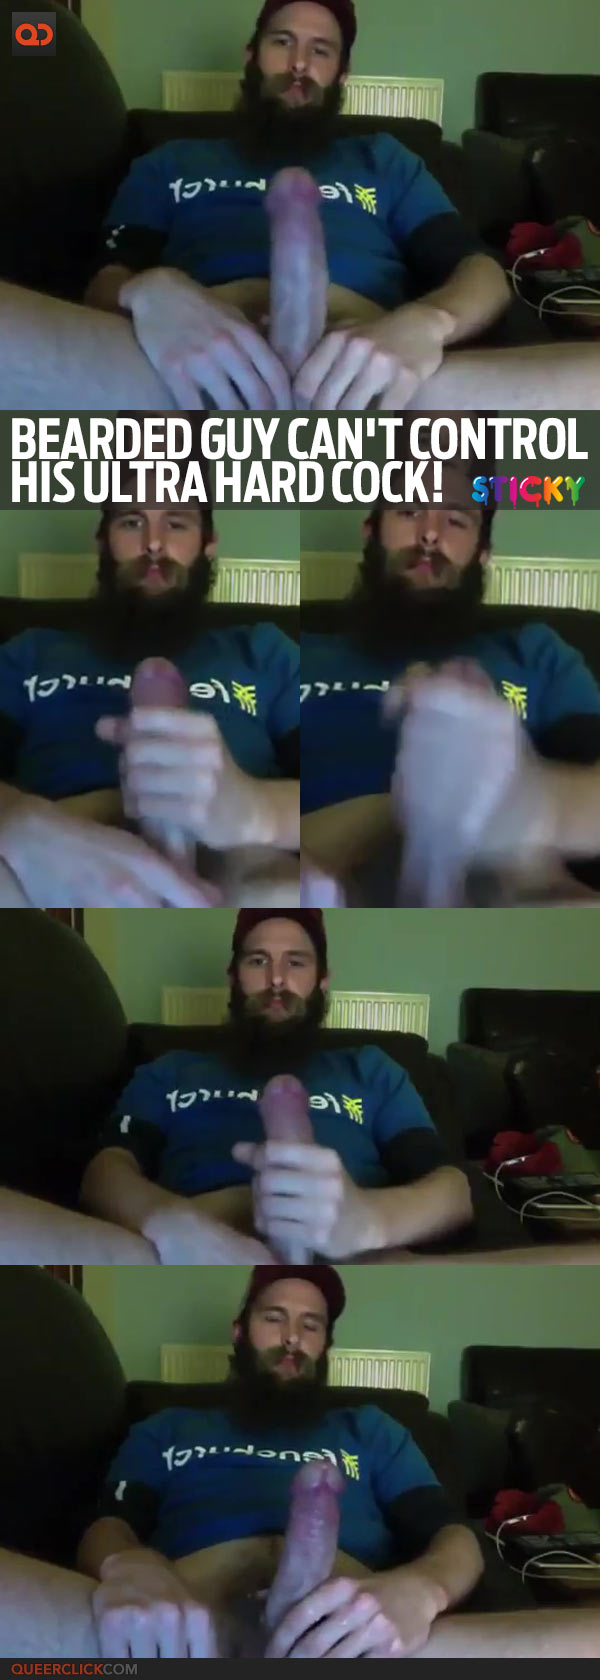 Bearded Guy Can't Control His Ultra Hard Cock!